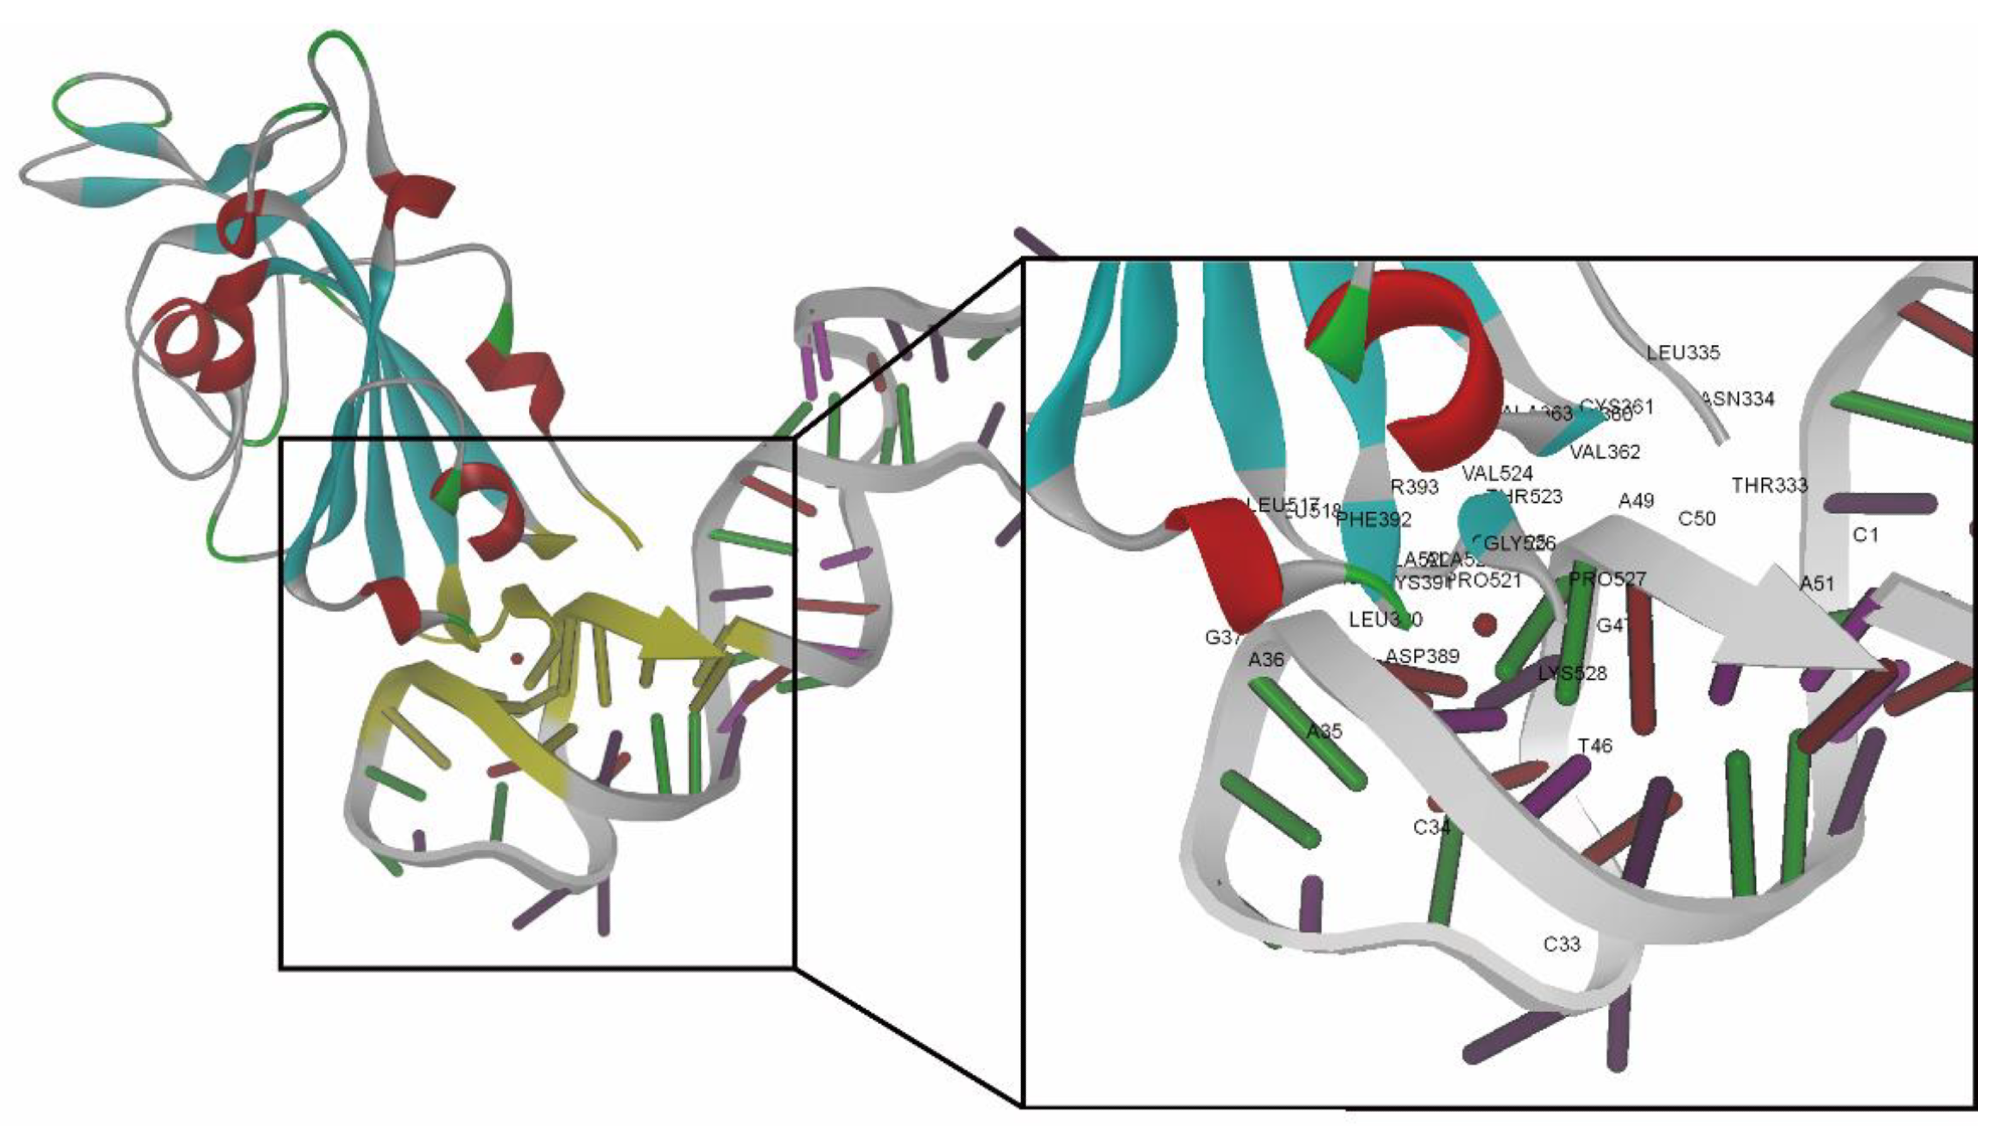 Best docking pose of RBD-1C aptamer against the S protein (visualization software: DS 4.1). Amino acids and nucleotides involved in the binding interface of the S protein/RBD-1C complex are marked with yellow. The close-up view presents the amino acids and nucleotides in the binding interface marked by labels.